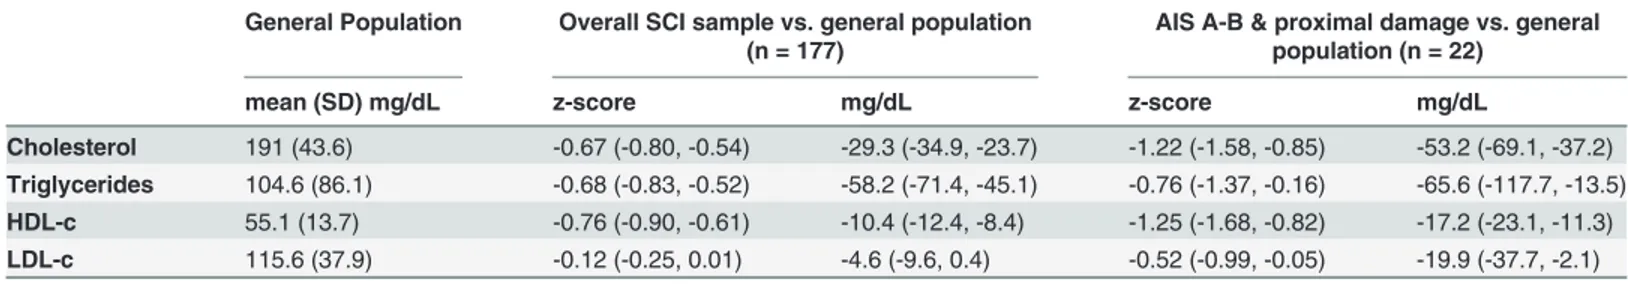 Table 5. Serum lipid values comparing SCI subjects with age- and sex-stratiﬁed reference values for the general population.